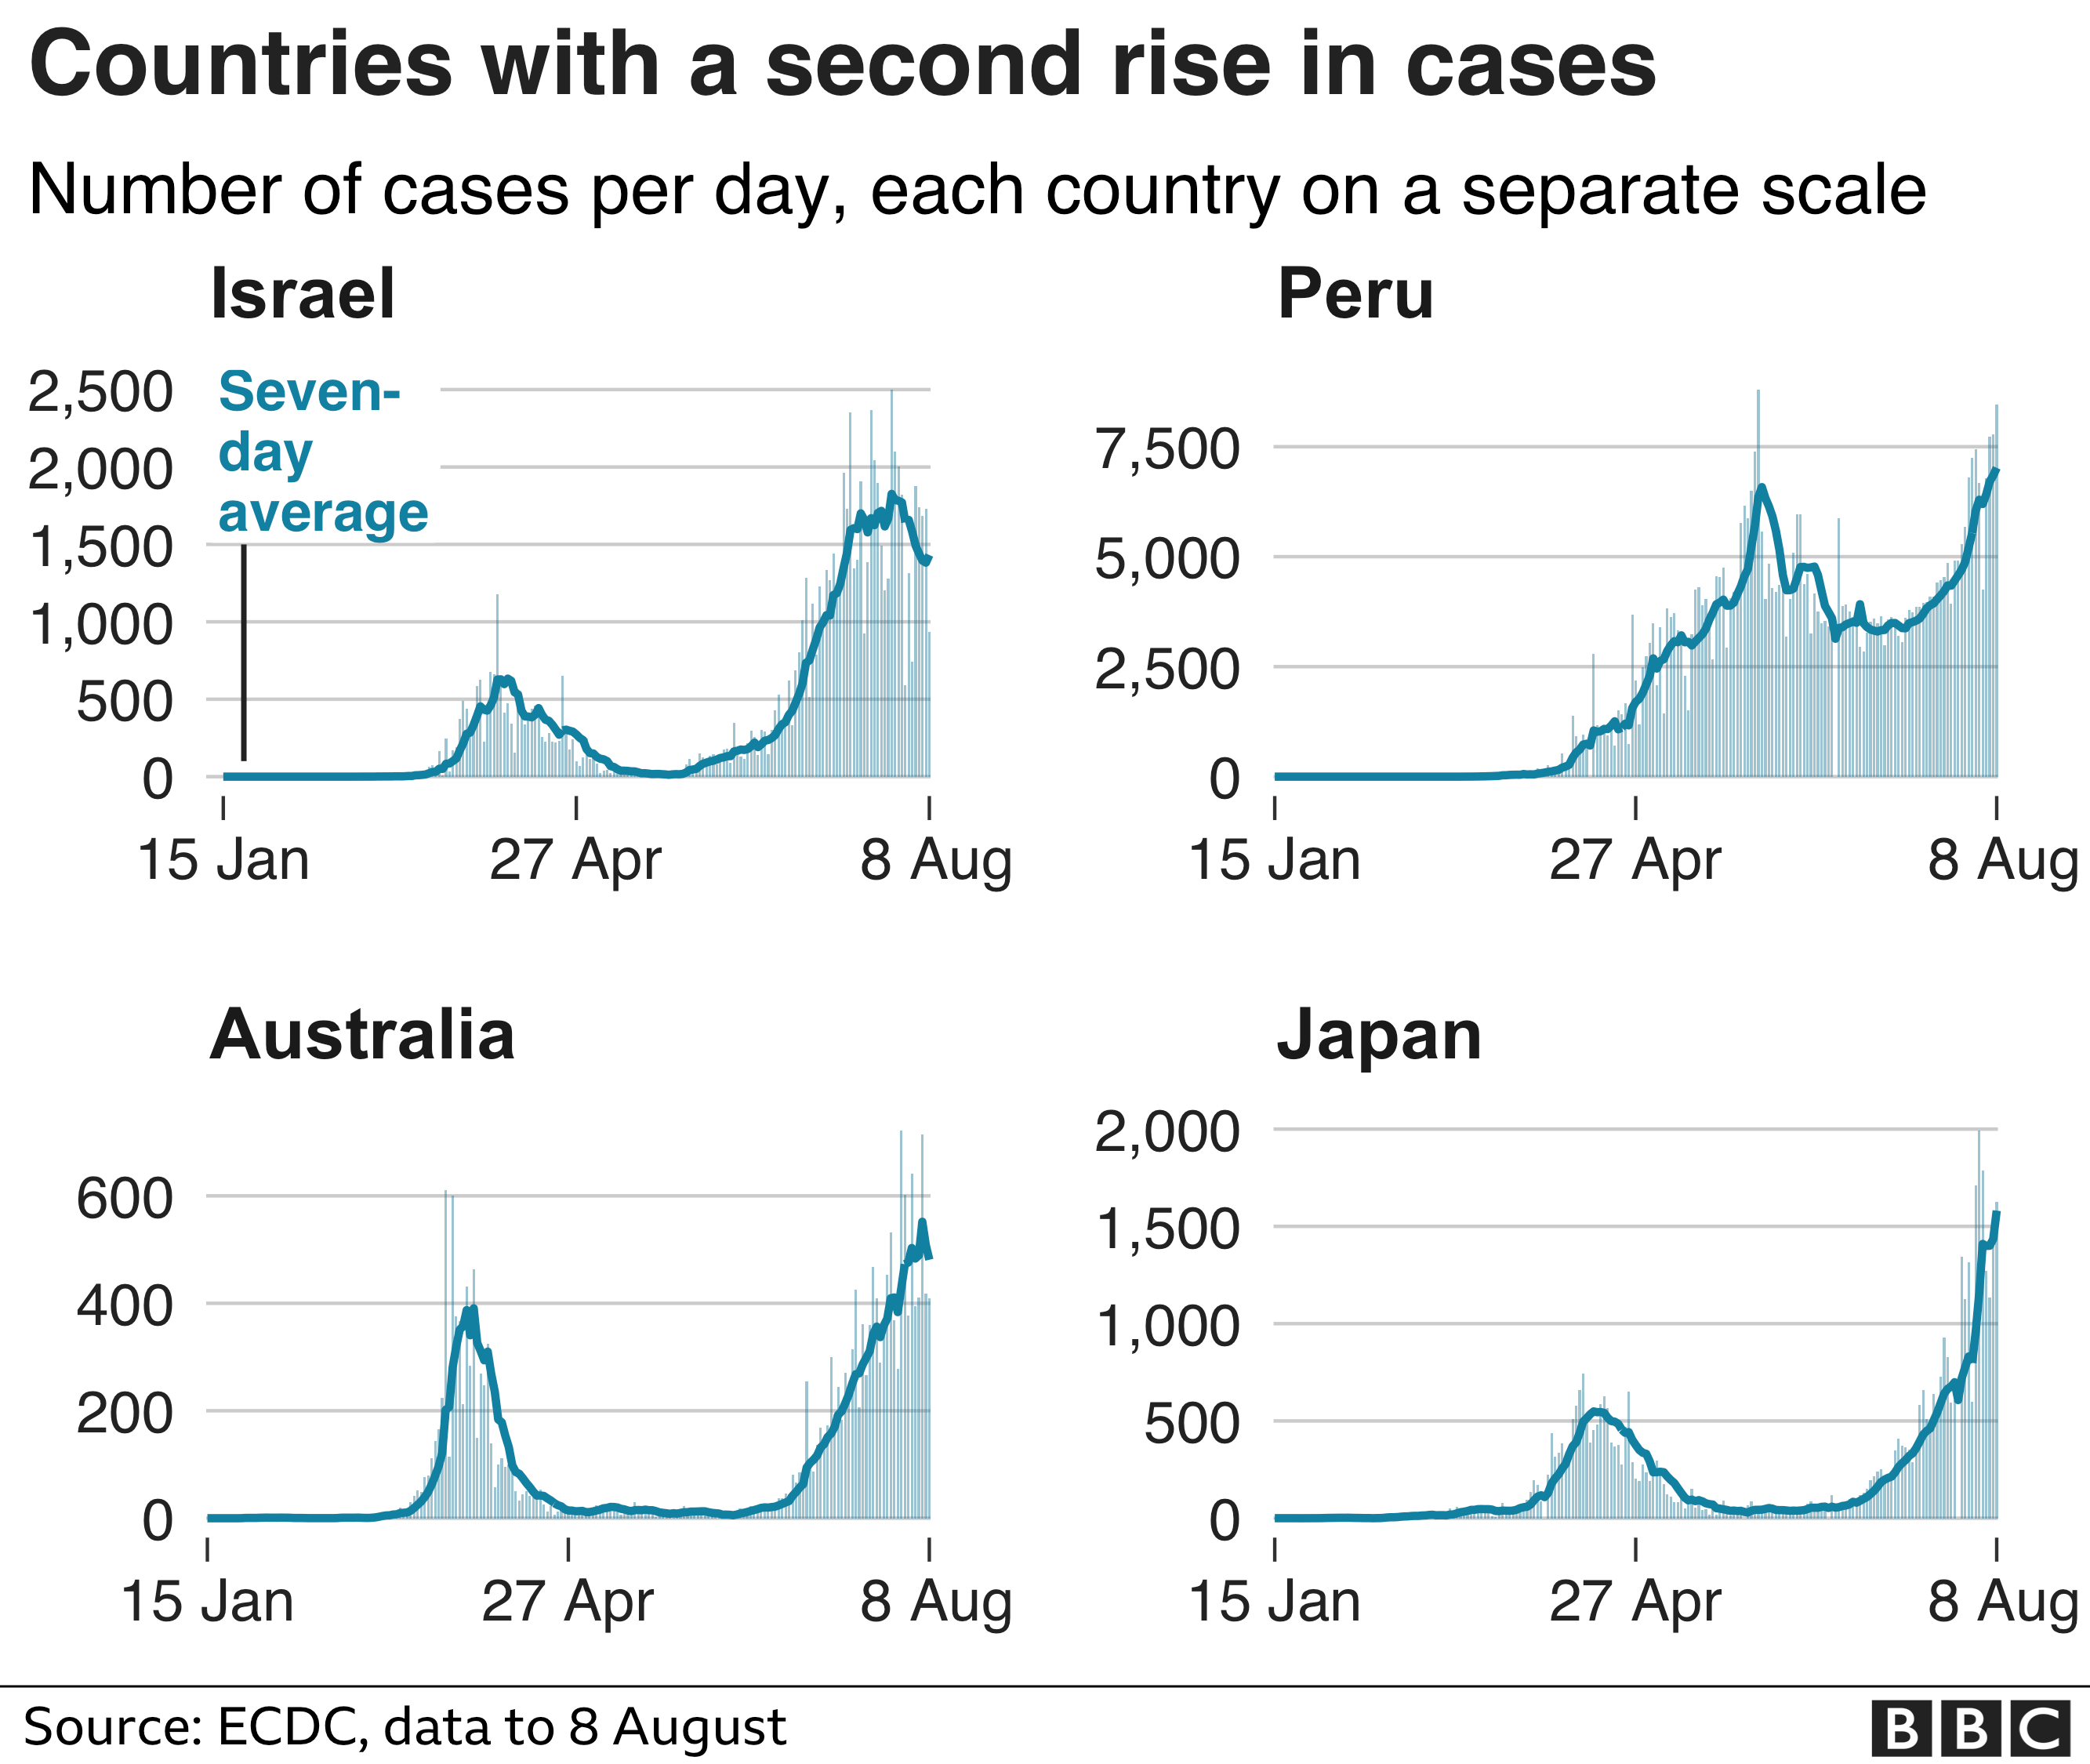 Chart shows countries like Israel, Peru, Australia and Japan have had a second rise in cases - 9 August